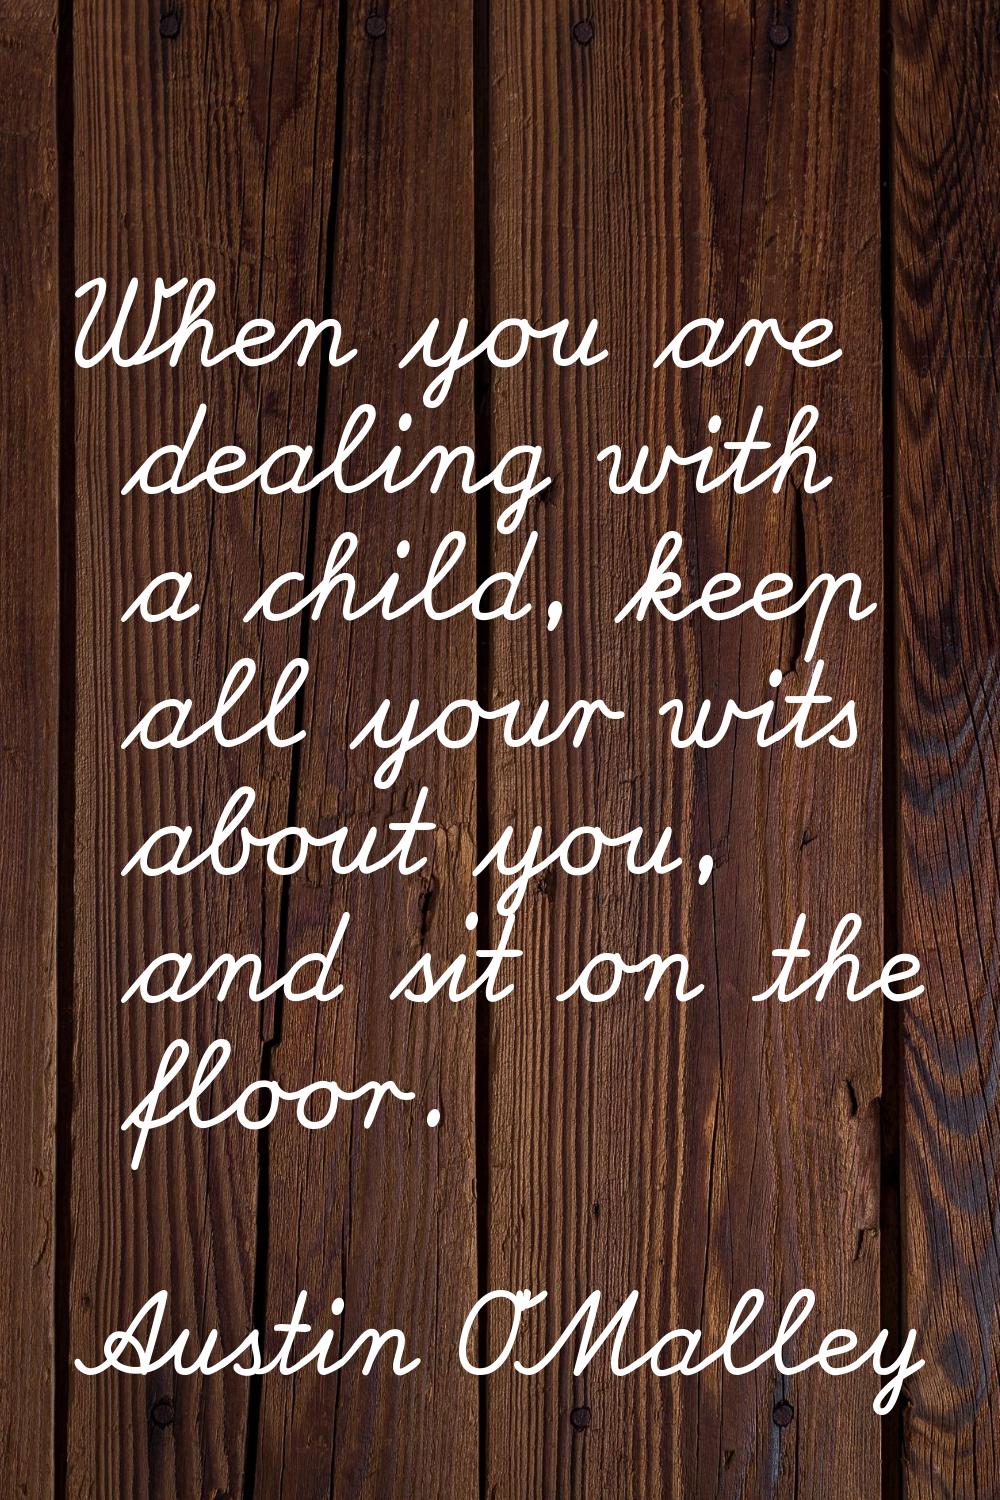 When you are dealing with a child, keep all your wits about you, and sit on the floor.